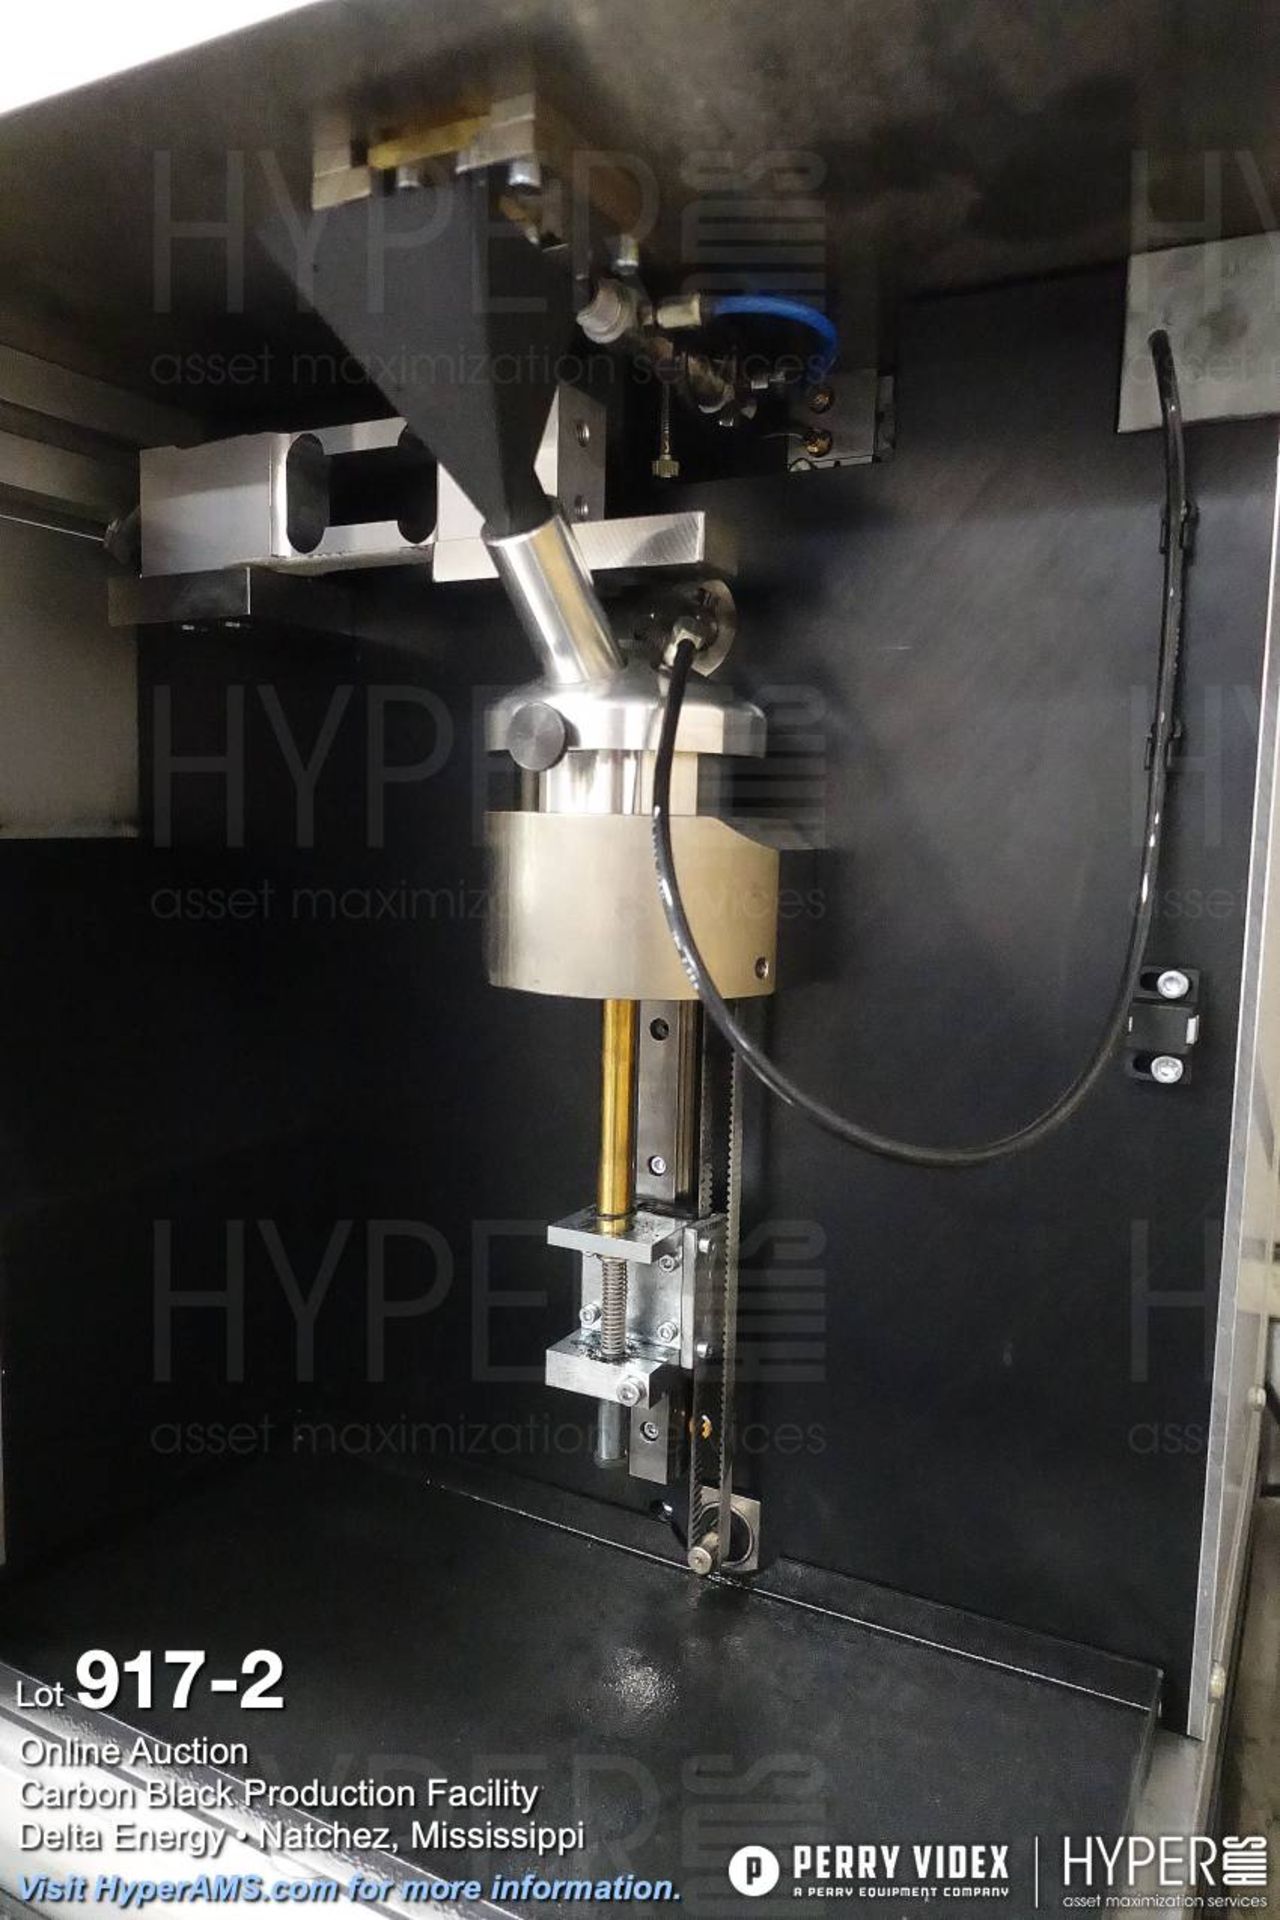 Hitec IPHT-01 pellet hardness tester (NEW IN 2022!) - Image 2 of 6